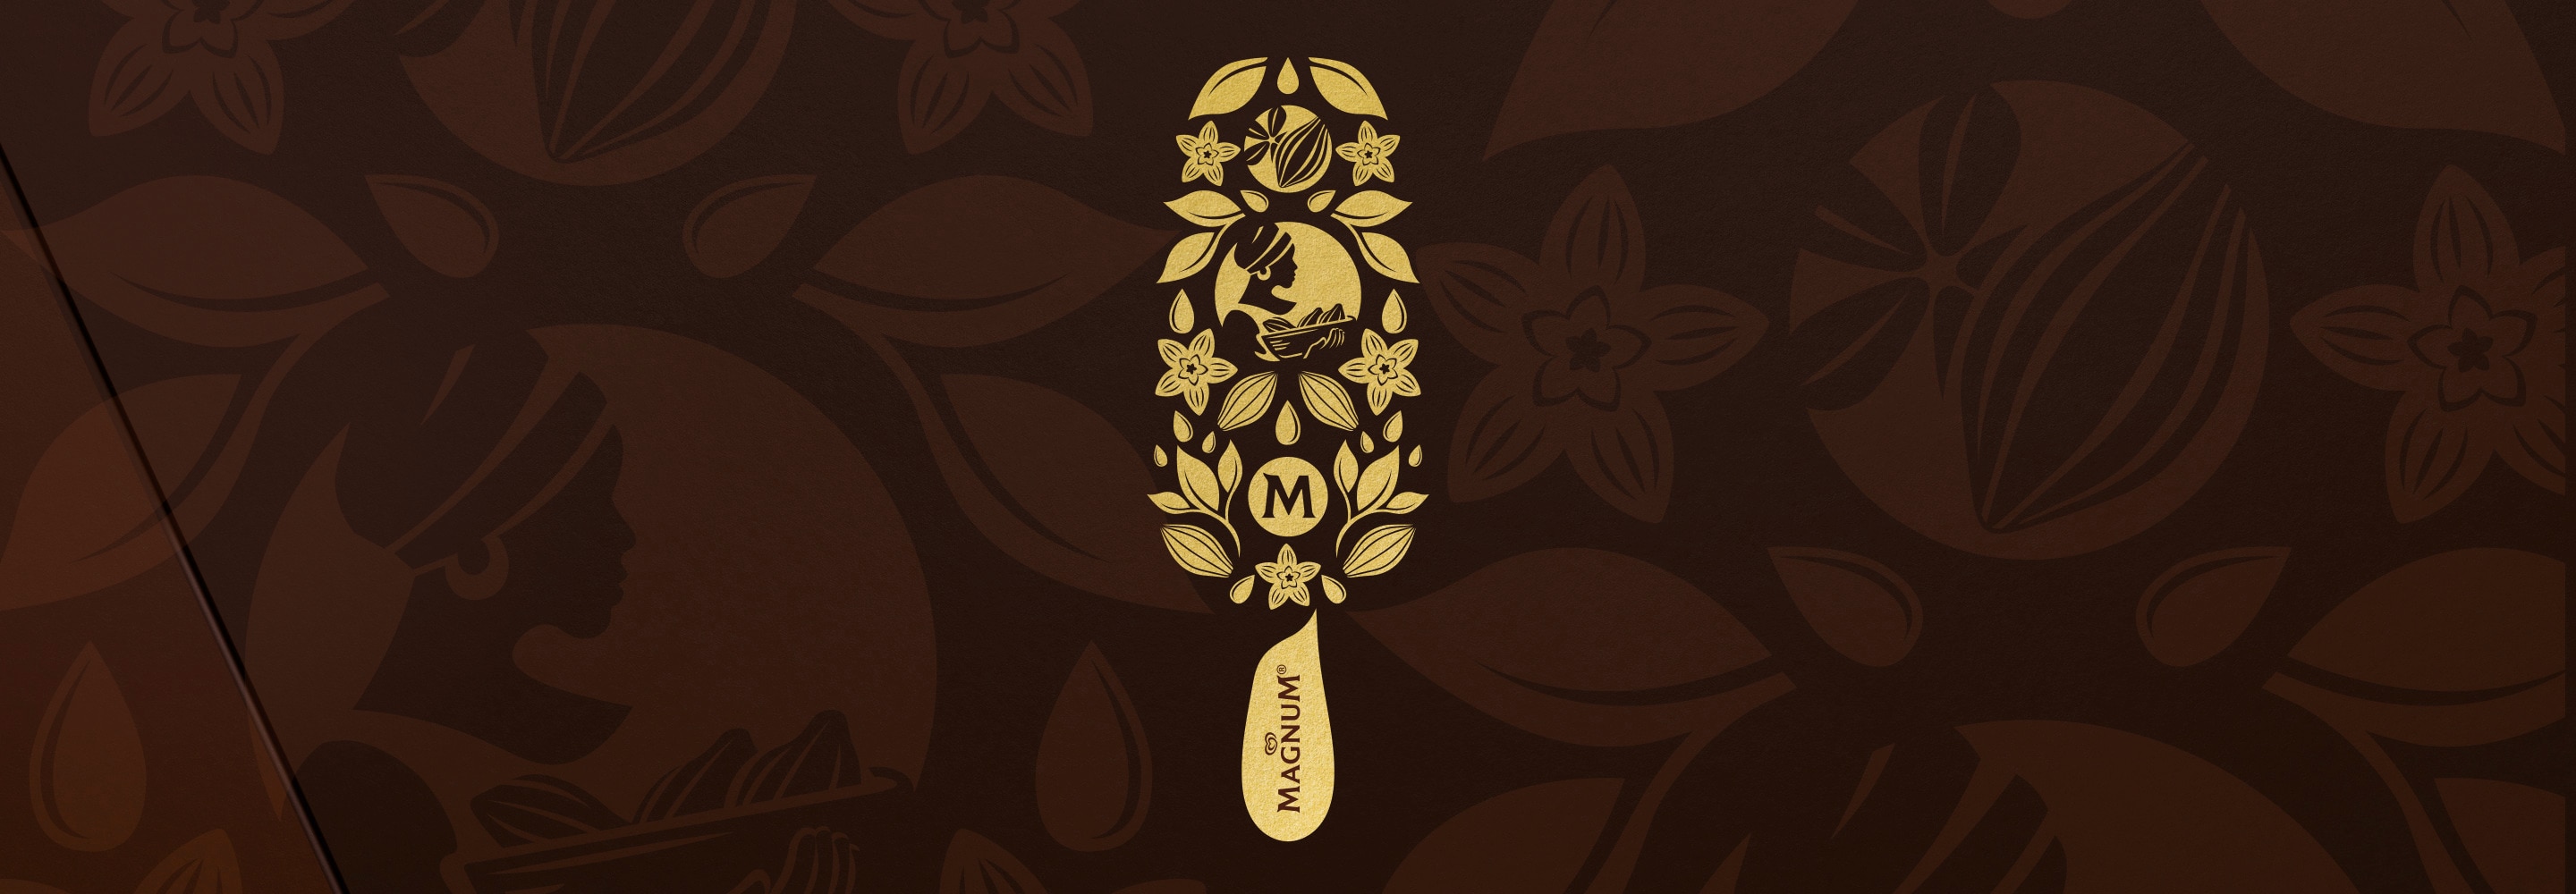 Golden magnum ice cream illustration on brown background made with vanilla flowers, cocoa pods, leaves and African woman with a headscarf carrying a wicker basket with cocoa pods